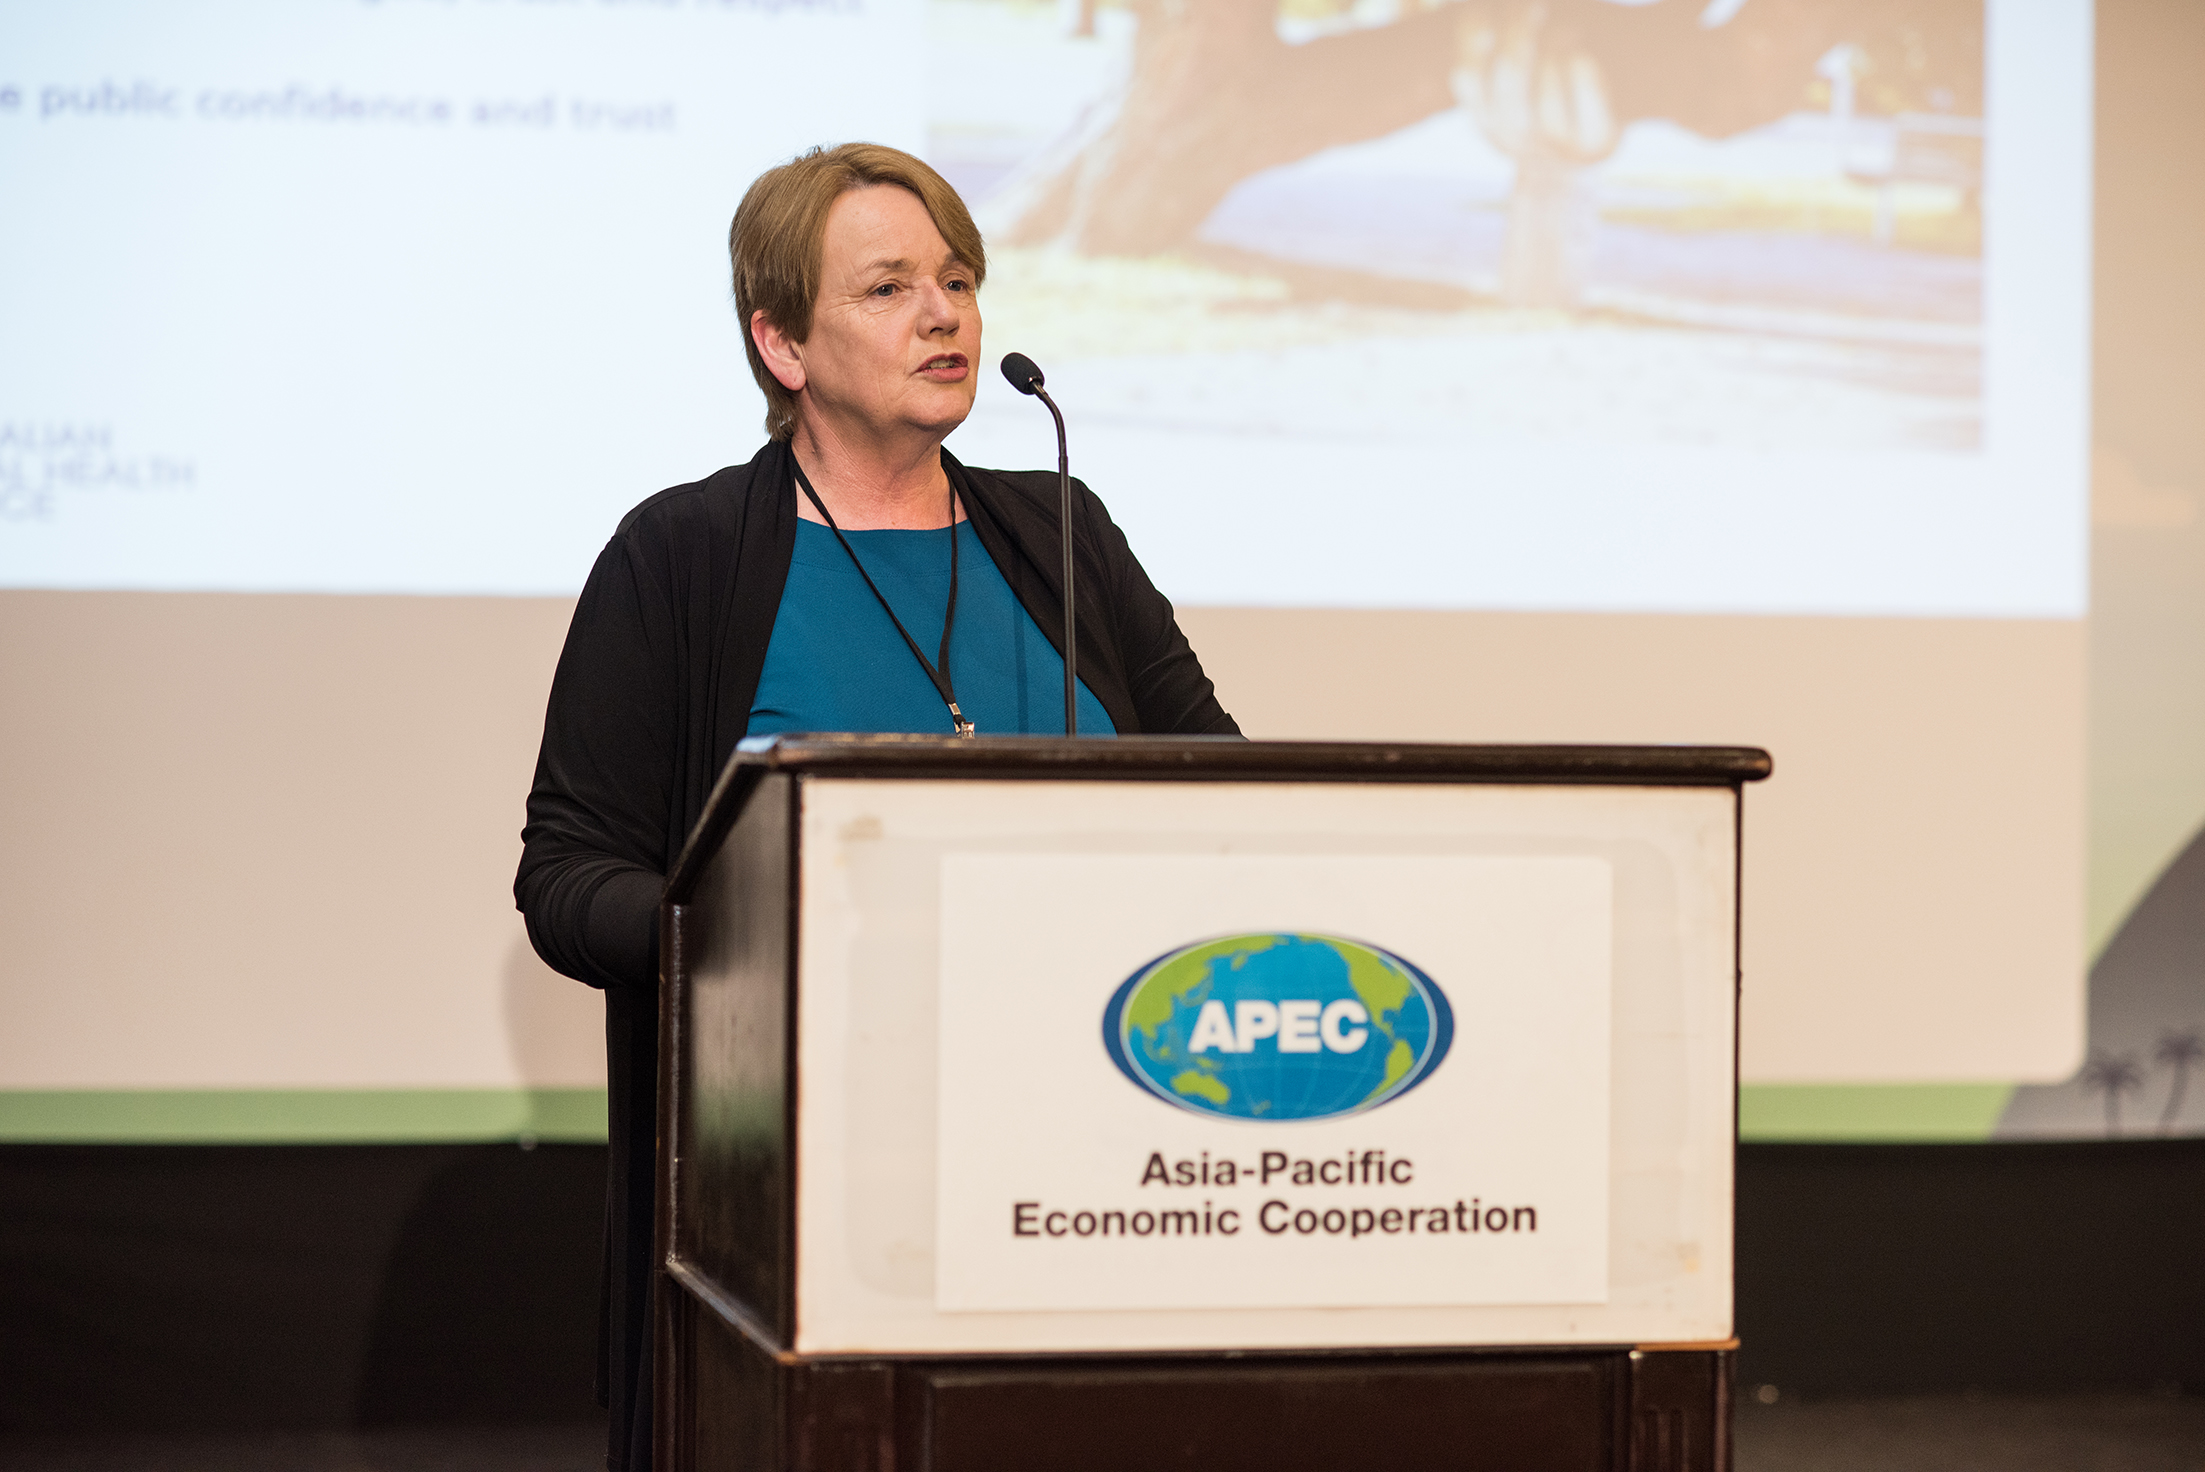 Alison Verhoeven, Chief Executive of the Australian Healthcare and Hospitals Association, presenting the Plenary Session at the 2019 APEC Forum